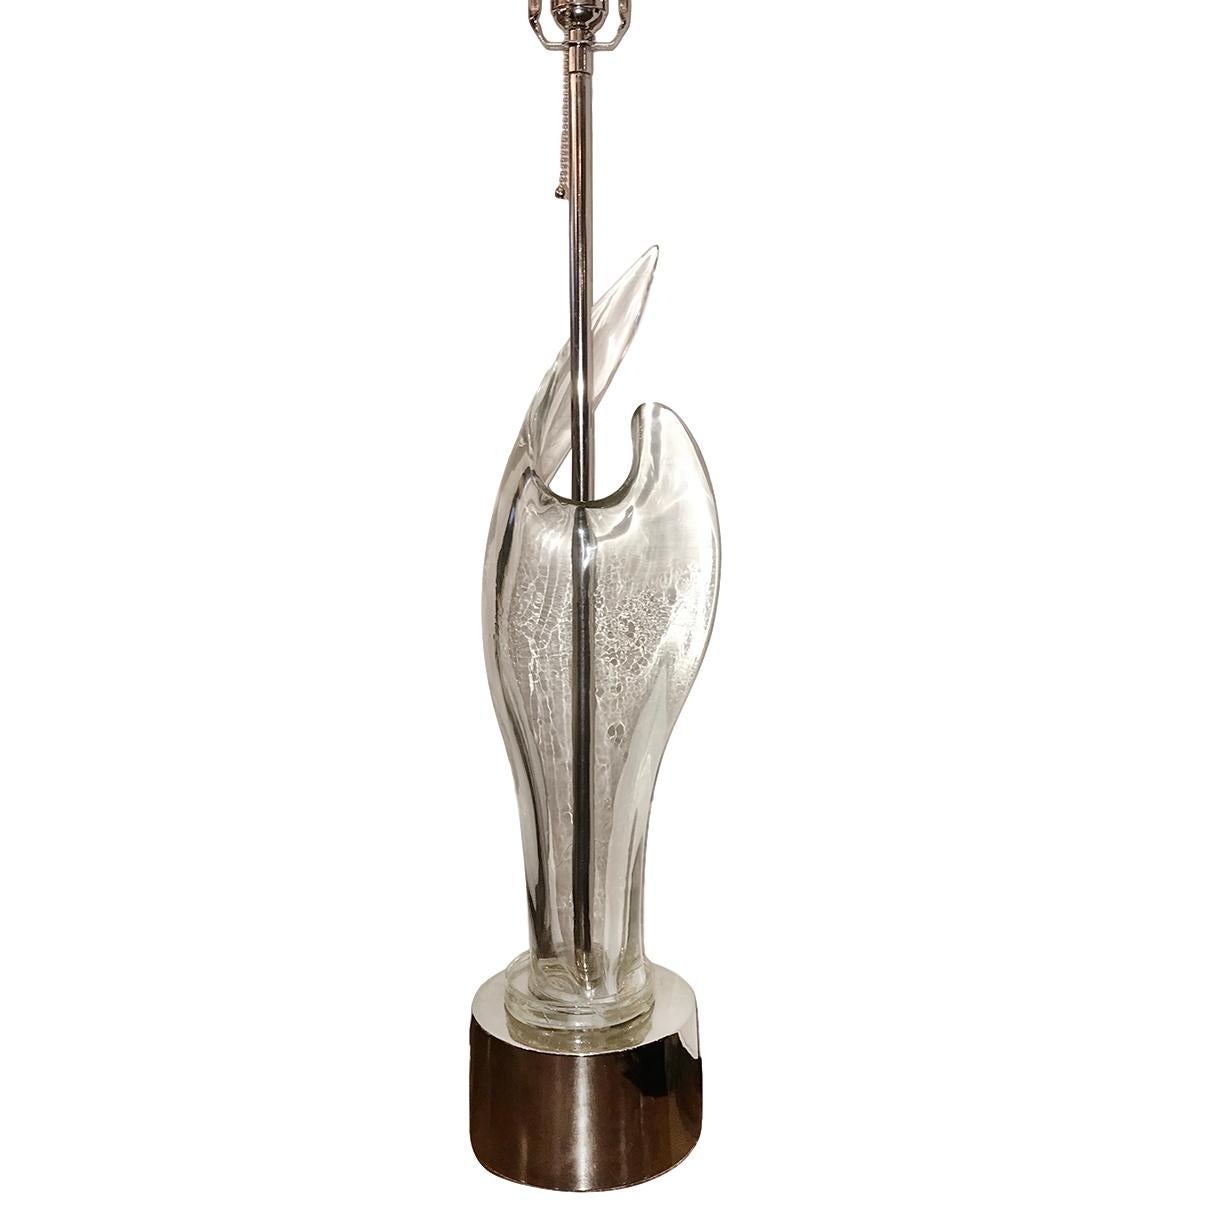 A large circa 1960s Italian sculptural blown glass table lamp with nickel plated base.

Measurements:
Height of body 28